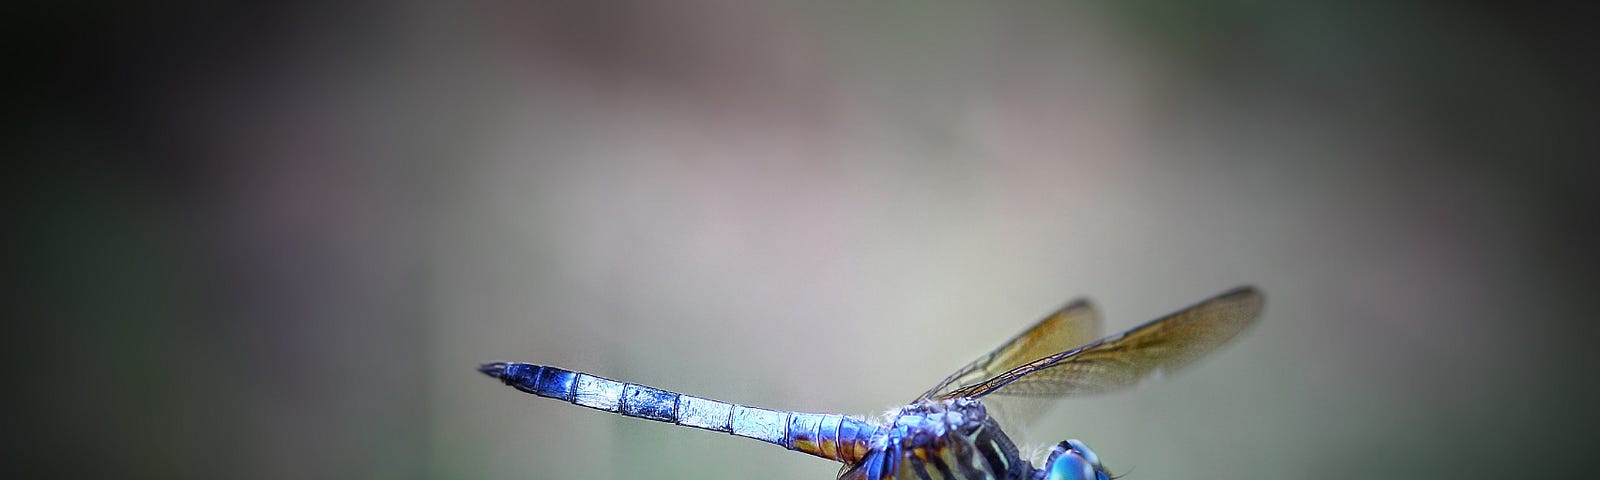 Picture of a dragon fly alighting on a plant stem.